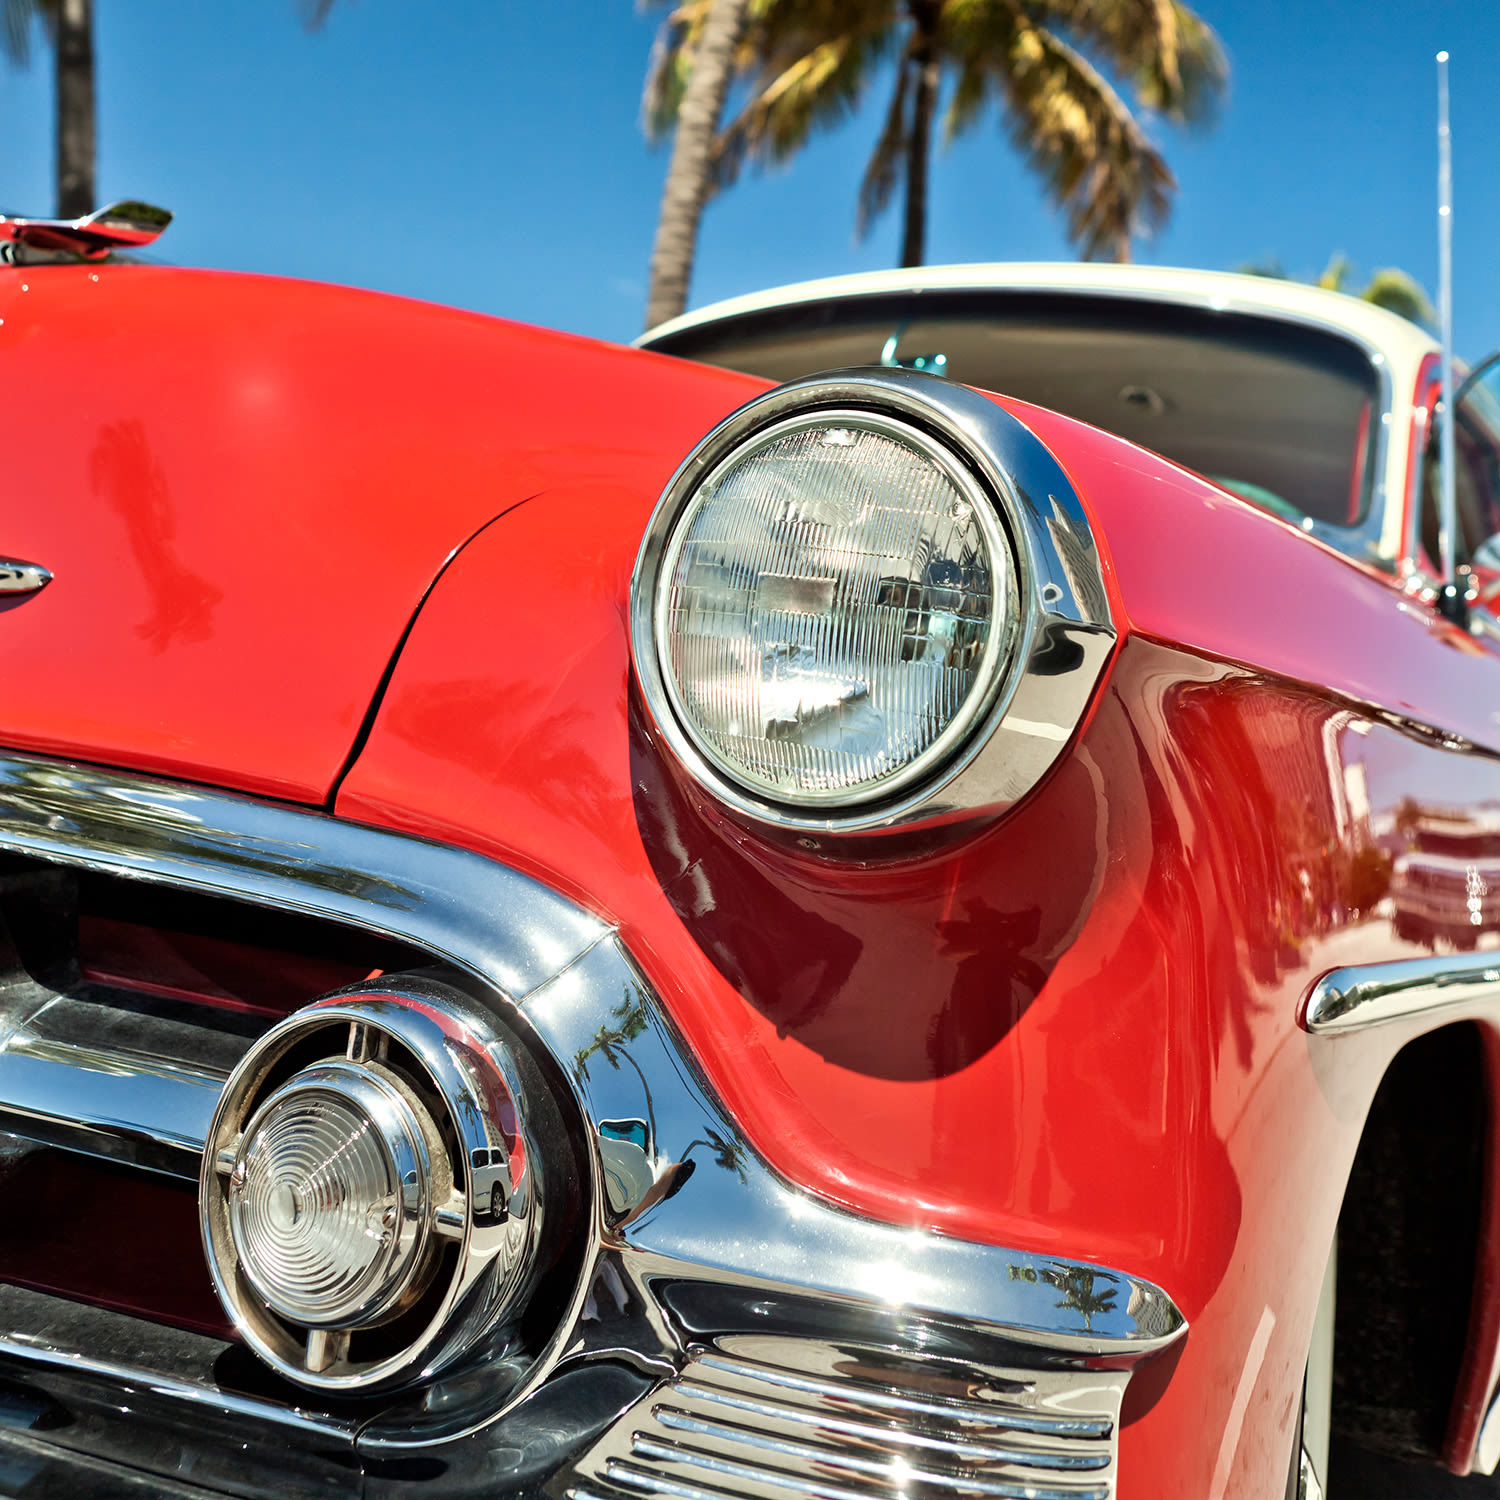 A red 1950s car in a tropical location